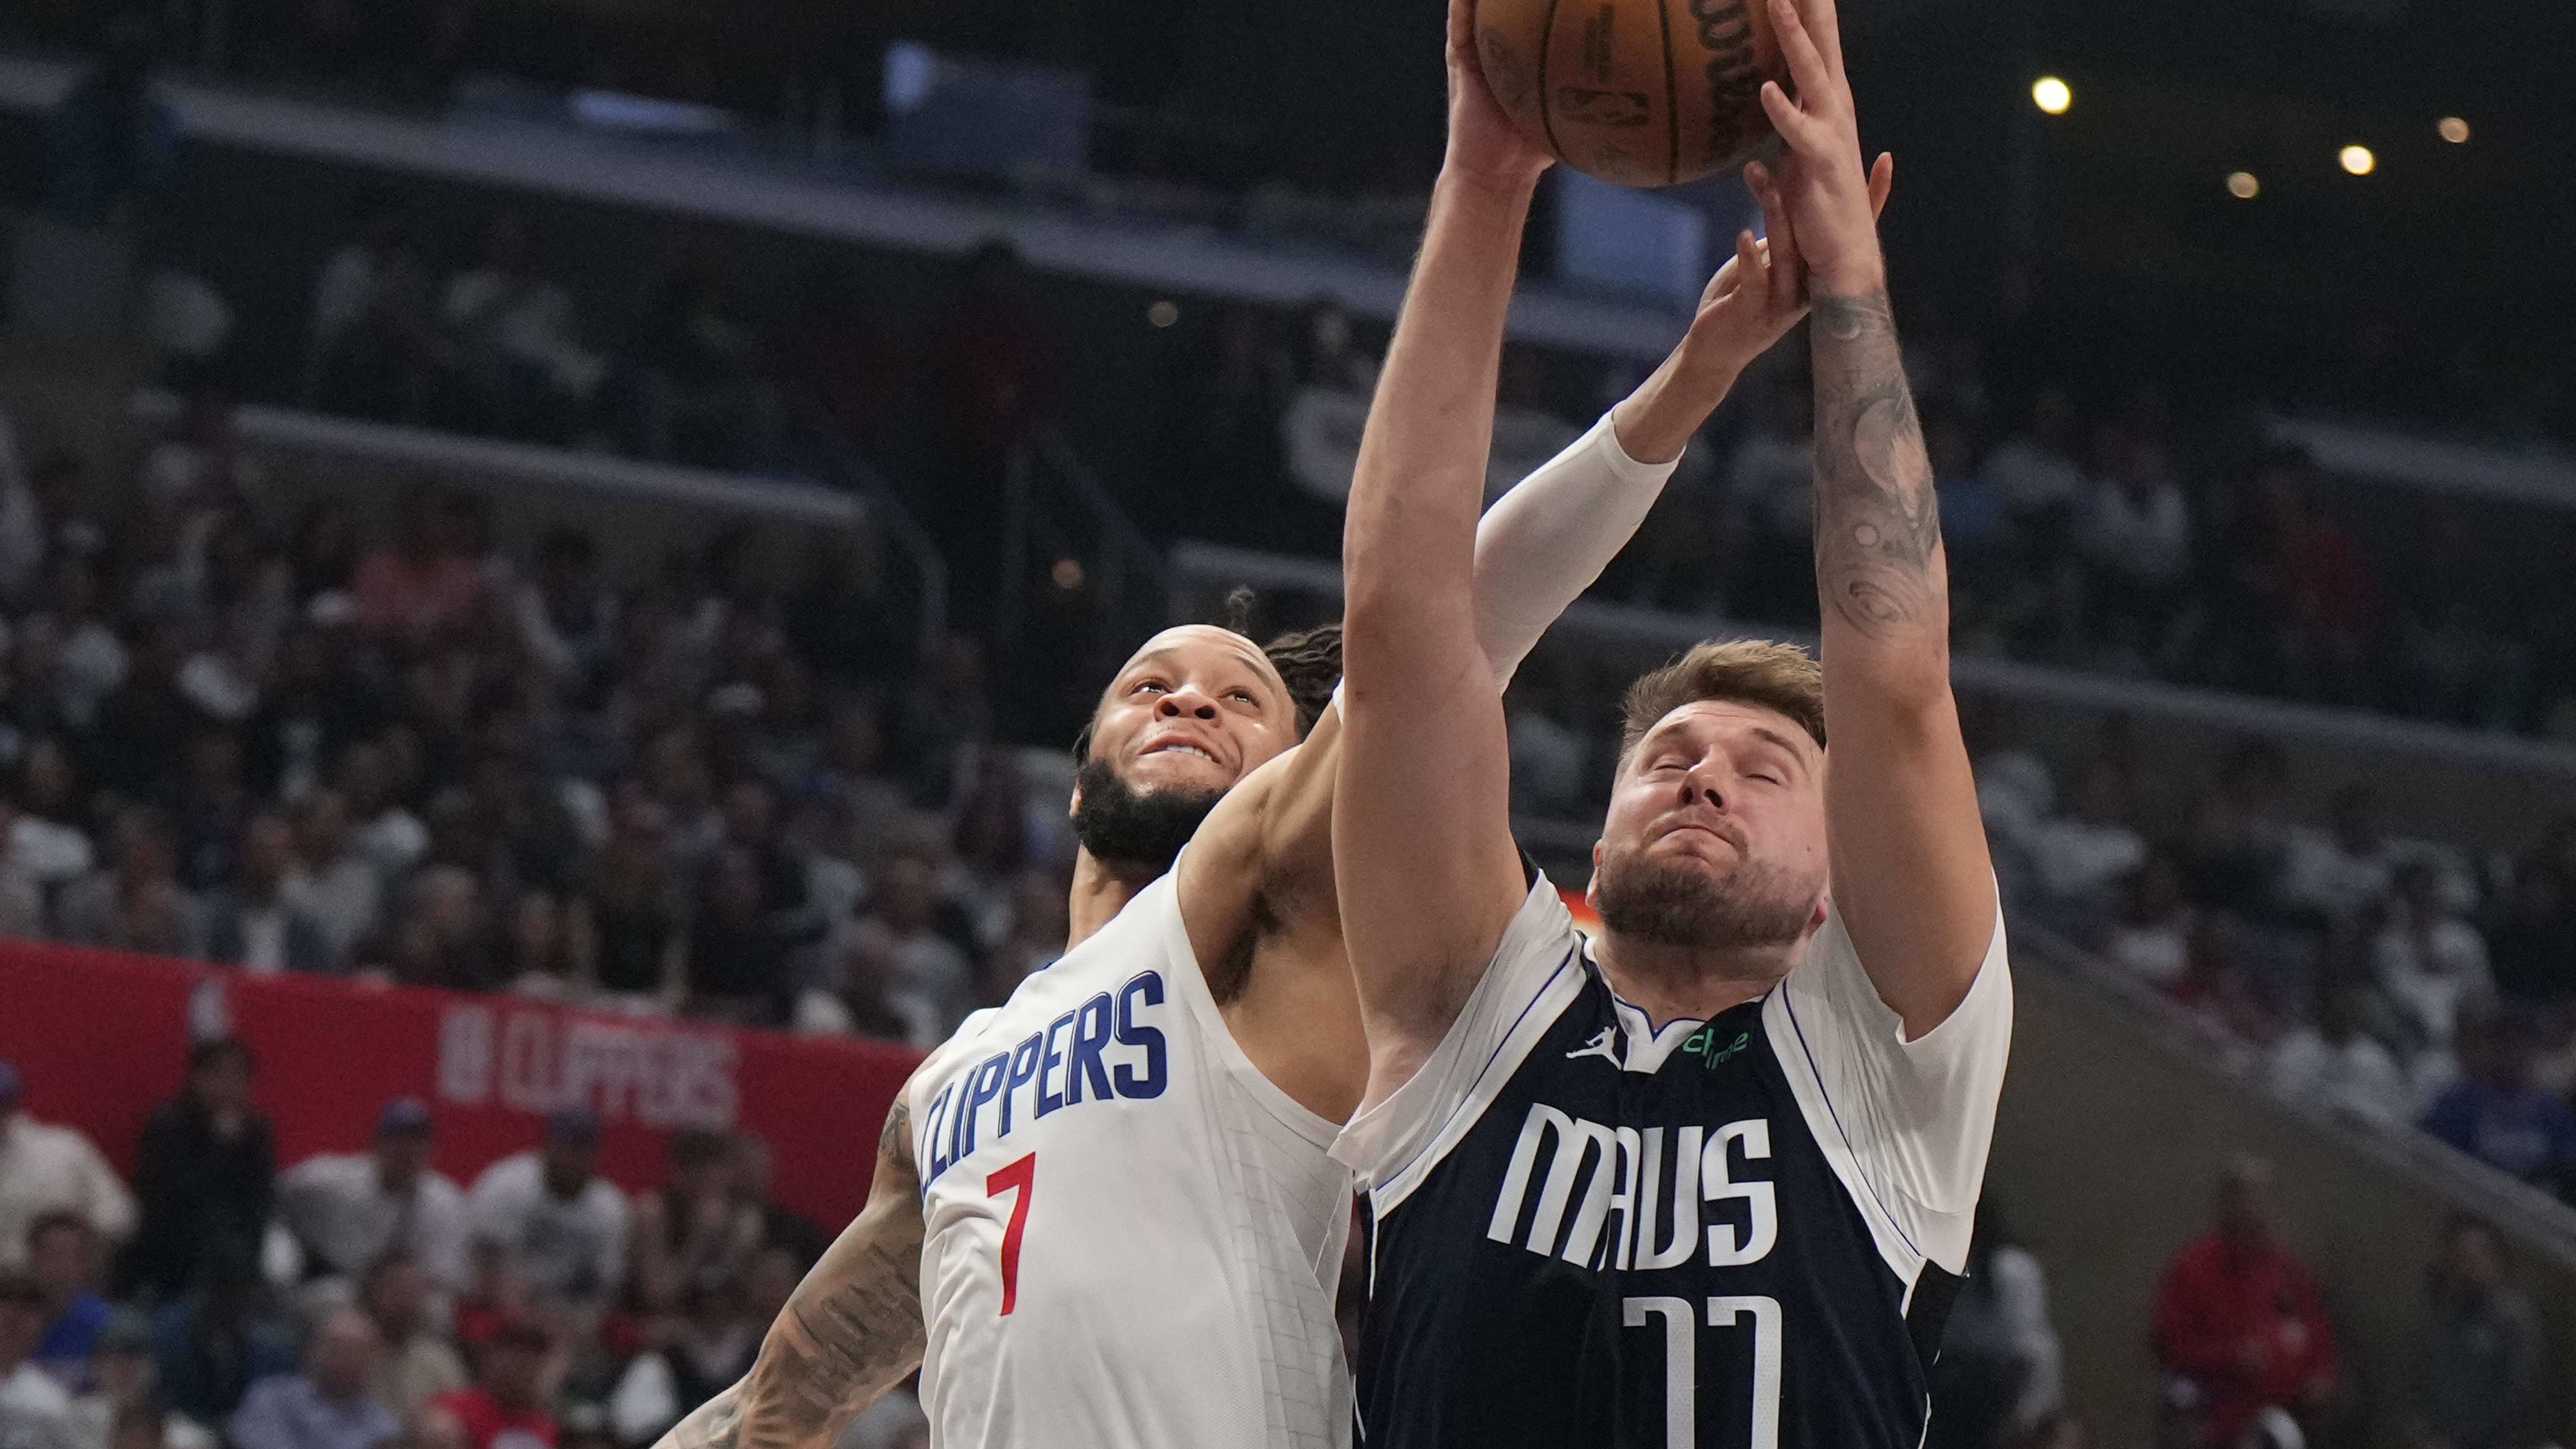 Luka Doncic Leads Dallas Mavericks to Game 5 Victory Over Clippers, Lead 3-2 in Series